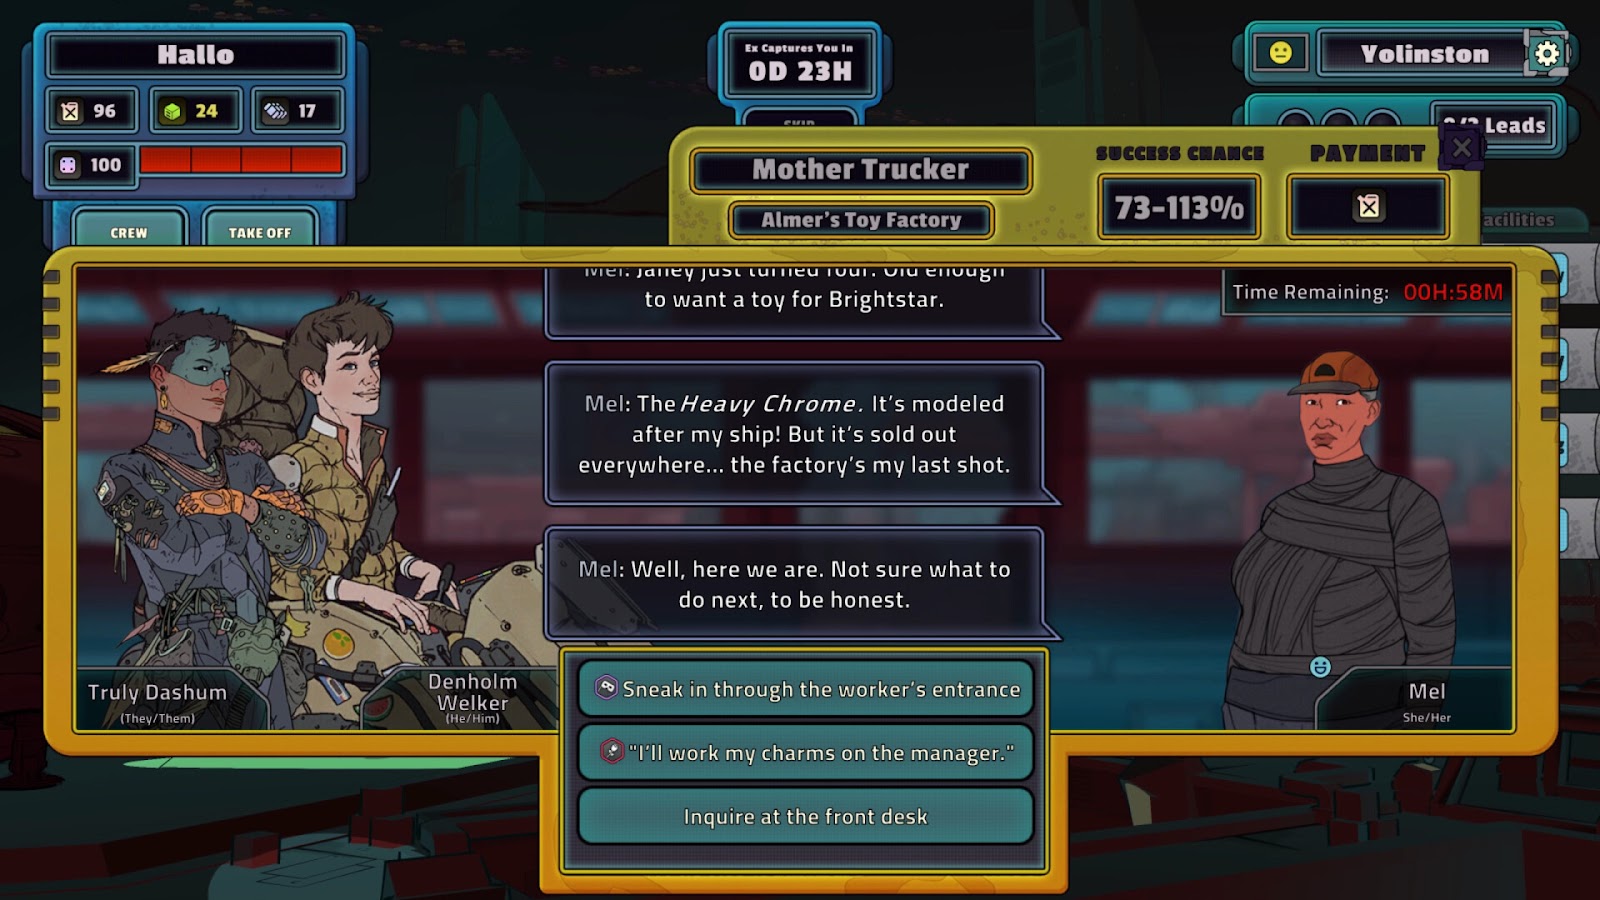 View of gameplay window in Crispy Creative's A Long Journey to an Uncertain End, depicting ways the cast becomes involved in problem solving through unique character skills